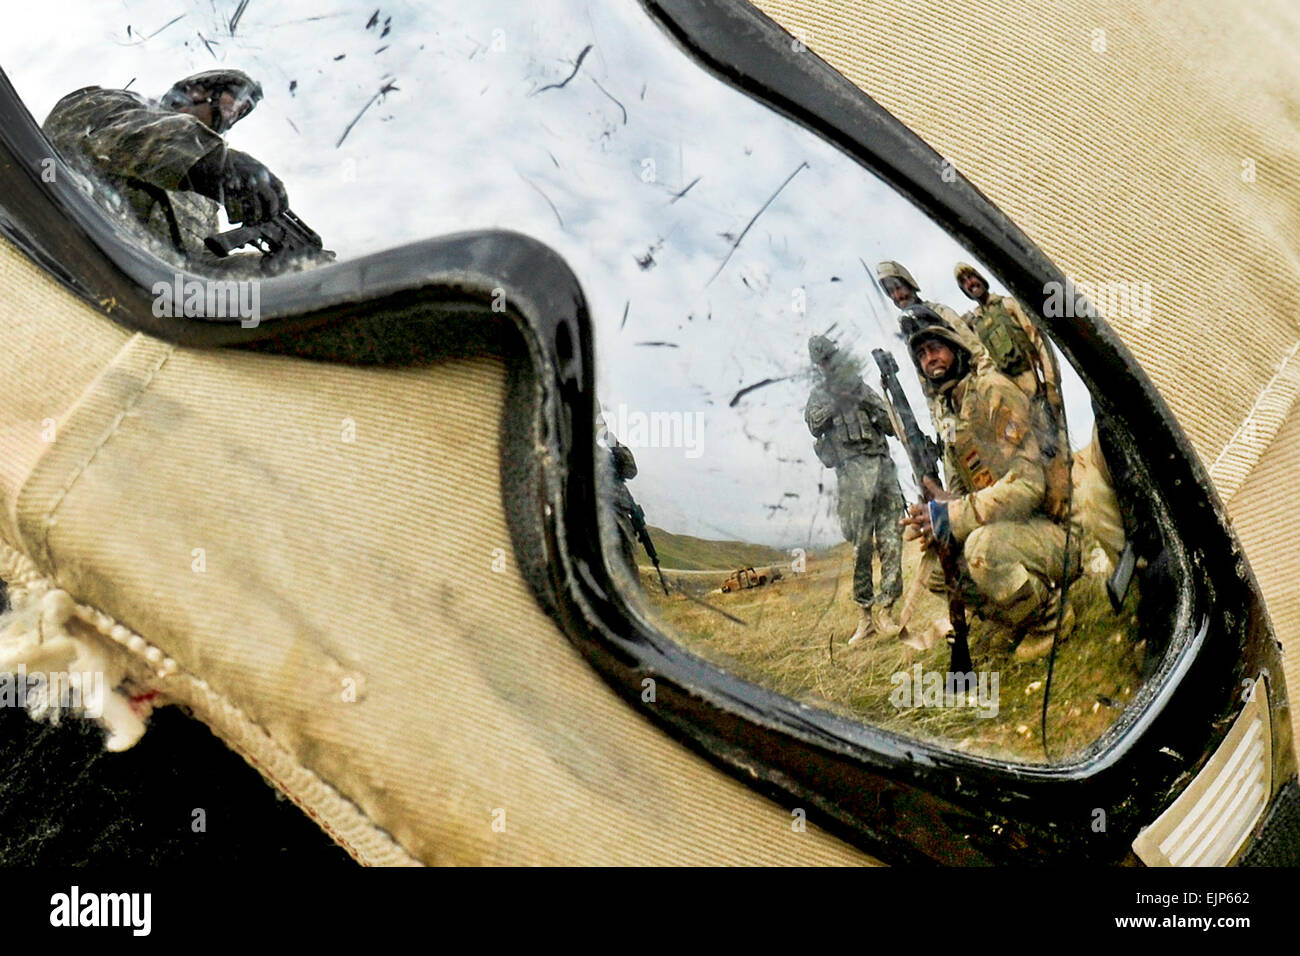 An Iraqi soldier's goggles catch the reflection of U.S. Army Staff Sgt. Kevin Murphy, left, as he instructs Iraqi soldiers of 2nd Battalion, 11th Brigade, 3rd Iraqi Army Division, on individual movement techniques at the Ghuzlani Warrior Training Center, Feb 2. Murphy and fellow Soldiers of 1st Squadron, 9th Cavalry Regiment, 4th Advise and Assist Brigade, 1st Cavalry Division, run Iraqi battalions through 25-day training cycles at the GWTC in order to teach them collective unit-level warfighting drills in order to bolster IA independence on national defense operations.  Sgt. Shawn Miller Stock Photo